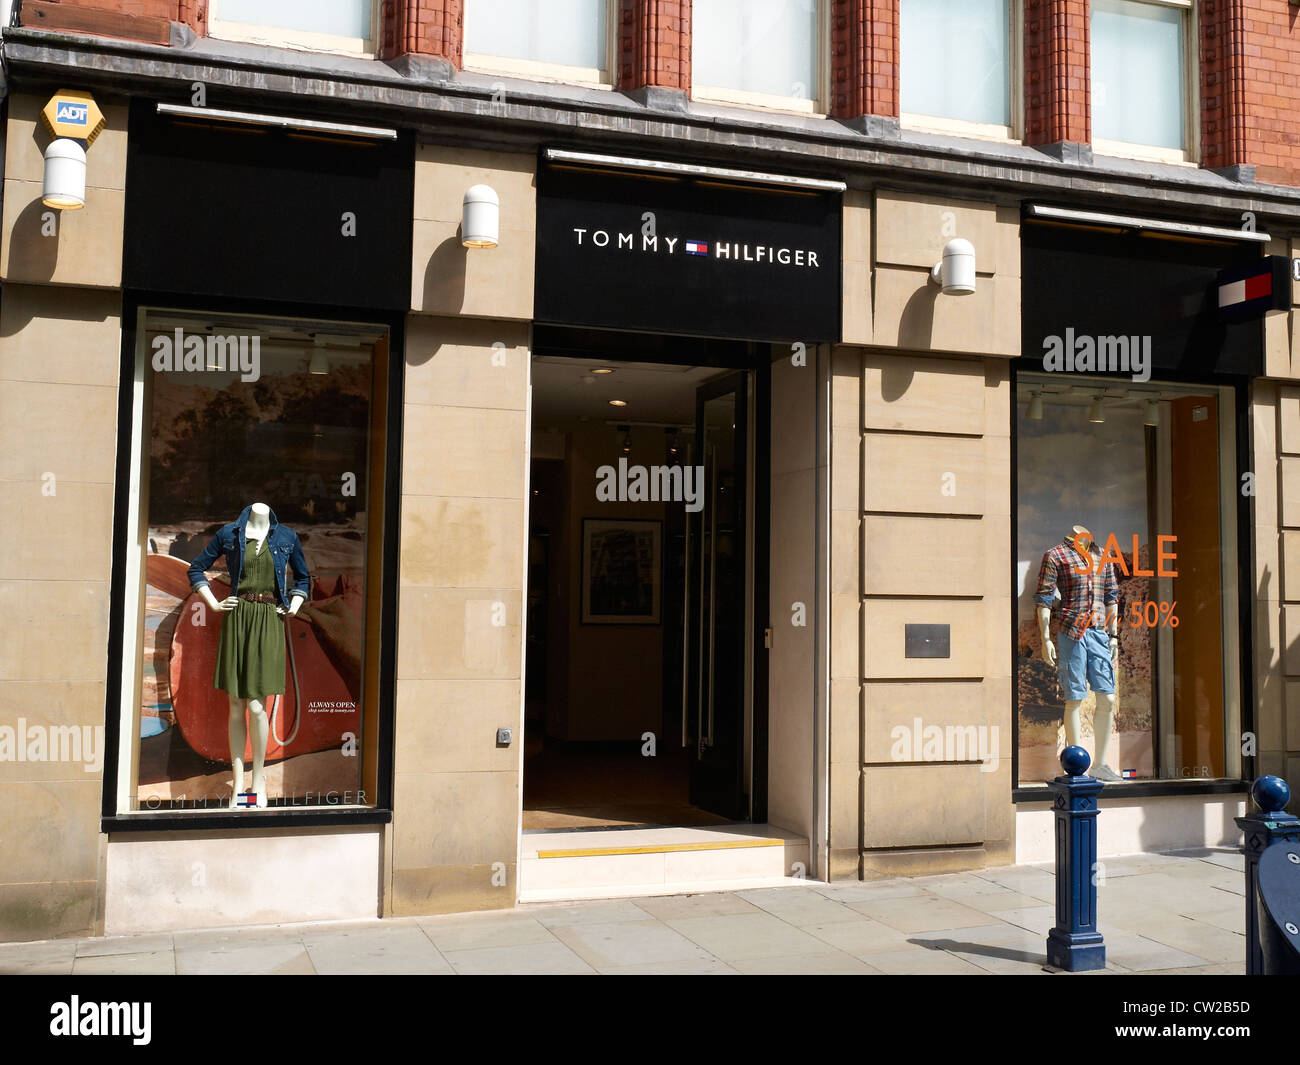 Tommy Hilfiger Store in King Street Manchester UK Stockfoto